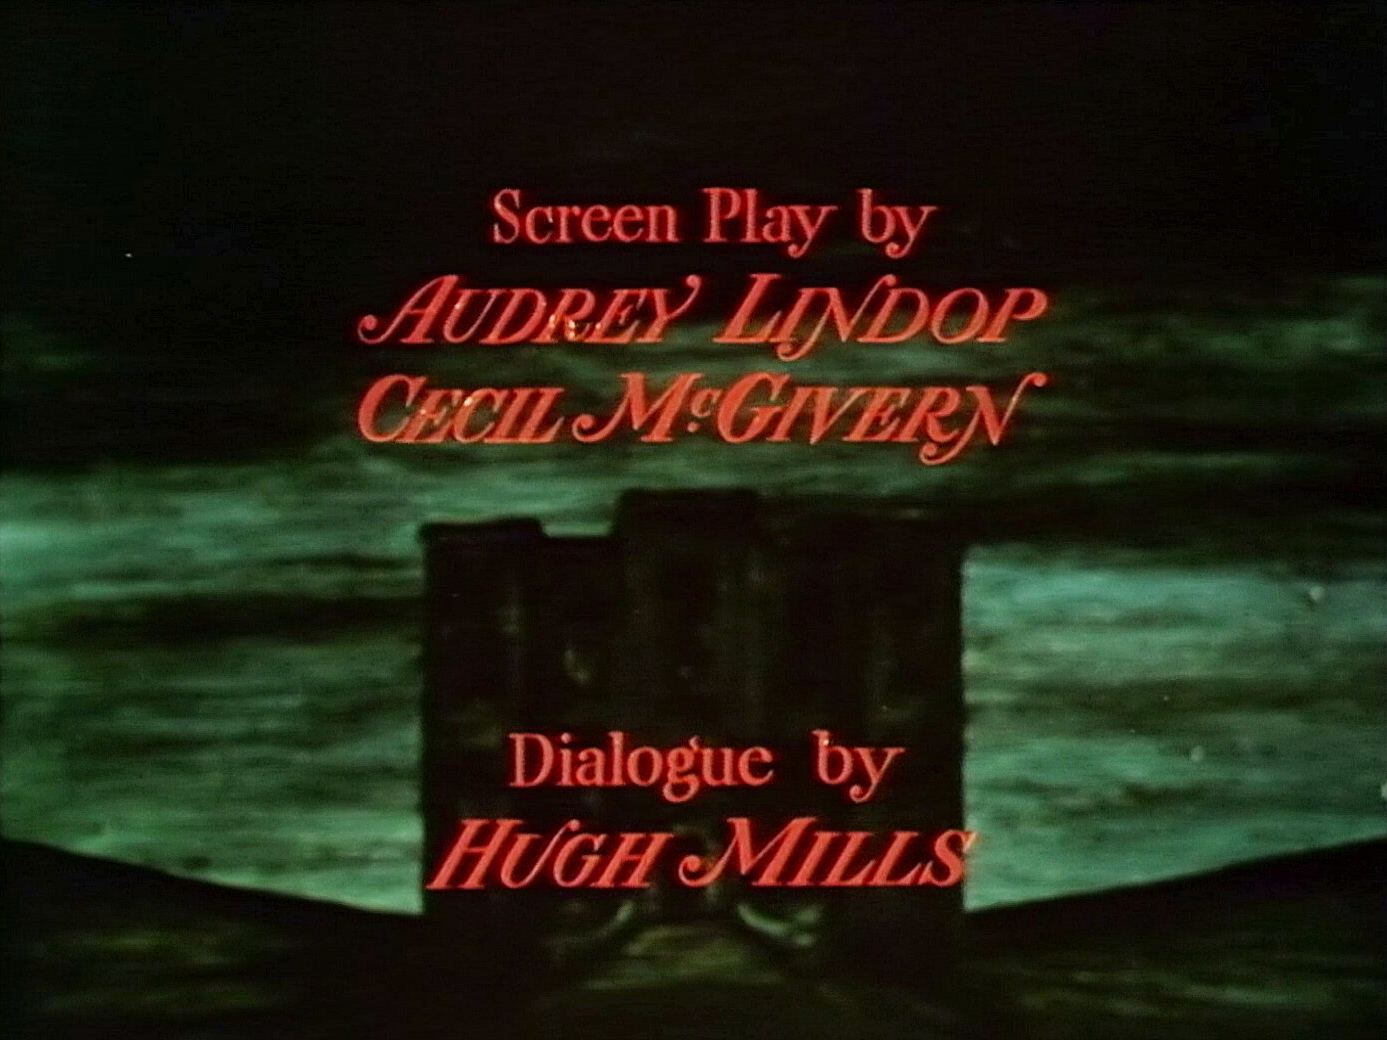 Main title from Blanche Fury (1948) (5). Screenplay by Audrey Lindop, Cecil McGivern